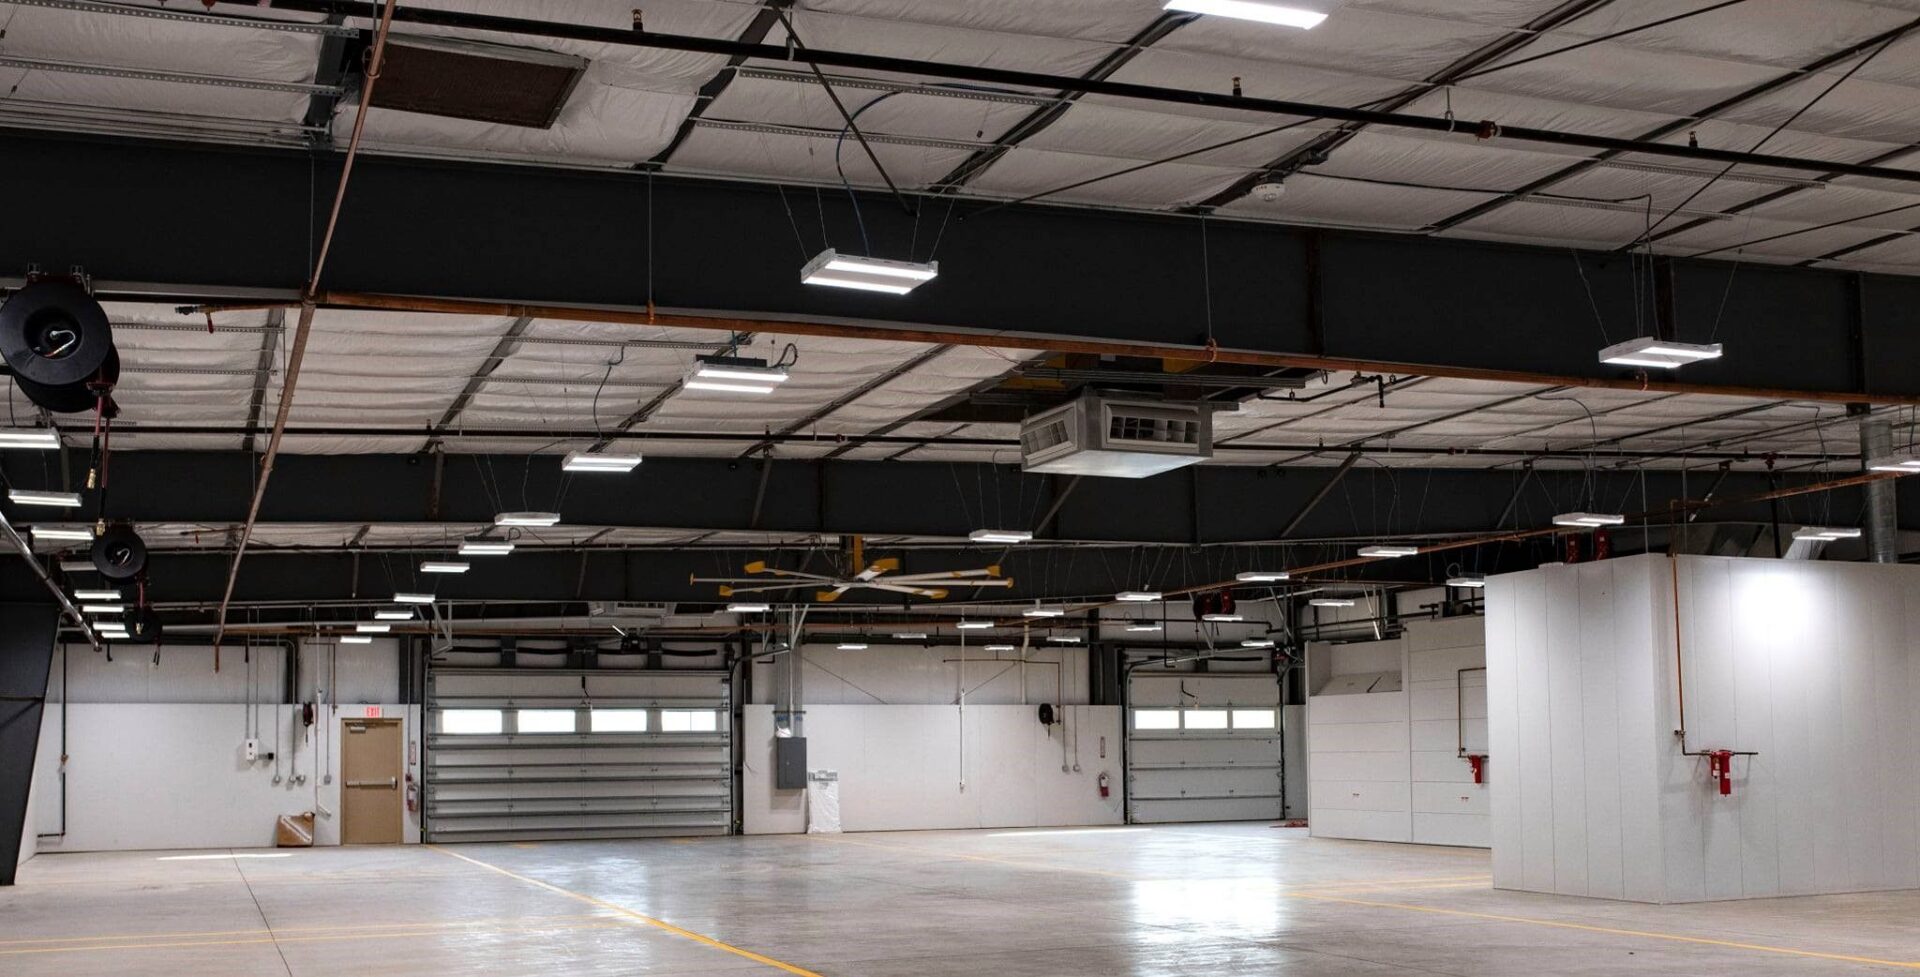 A large warehouse with lots of lights and overhead lighting.